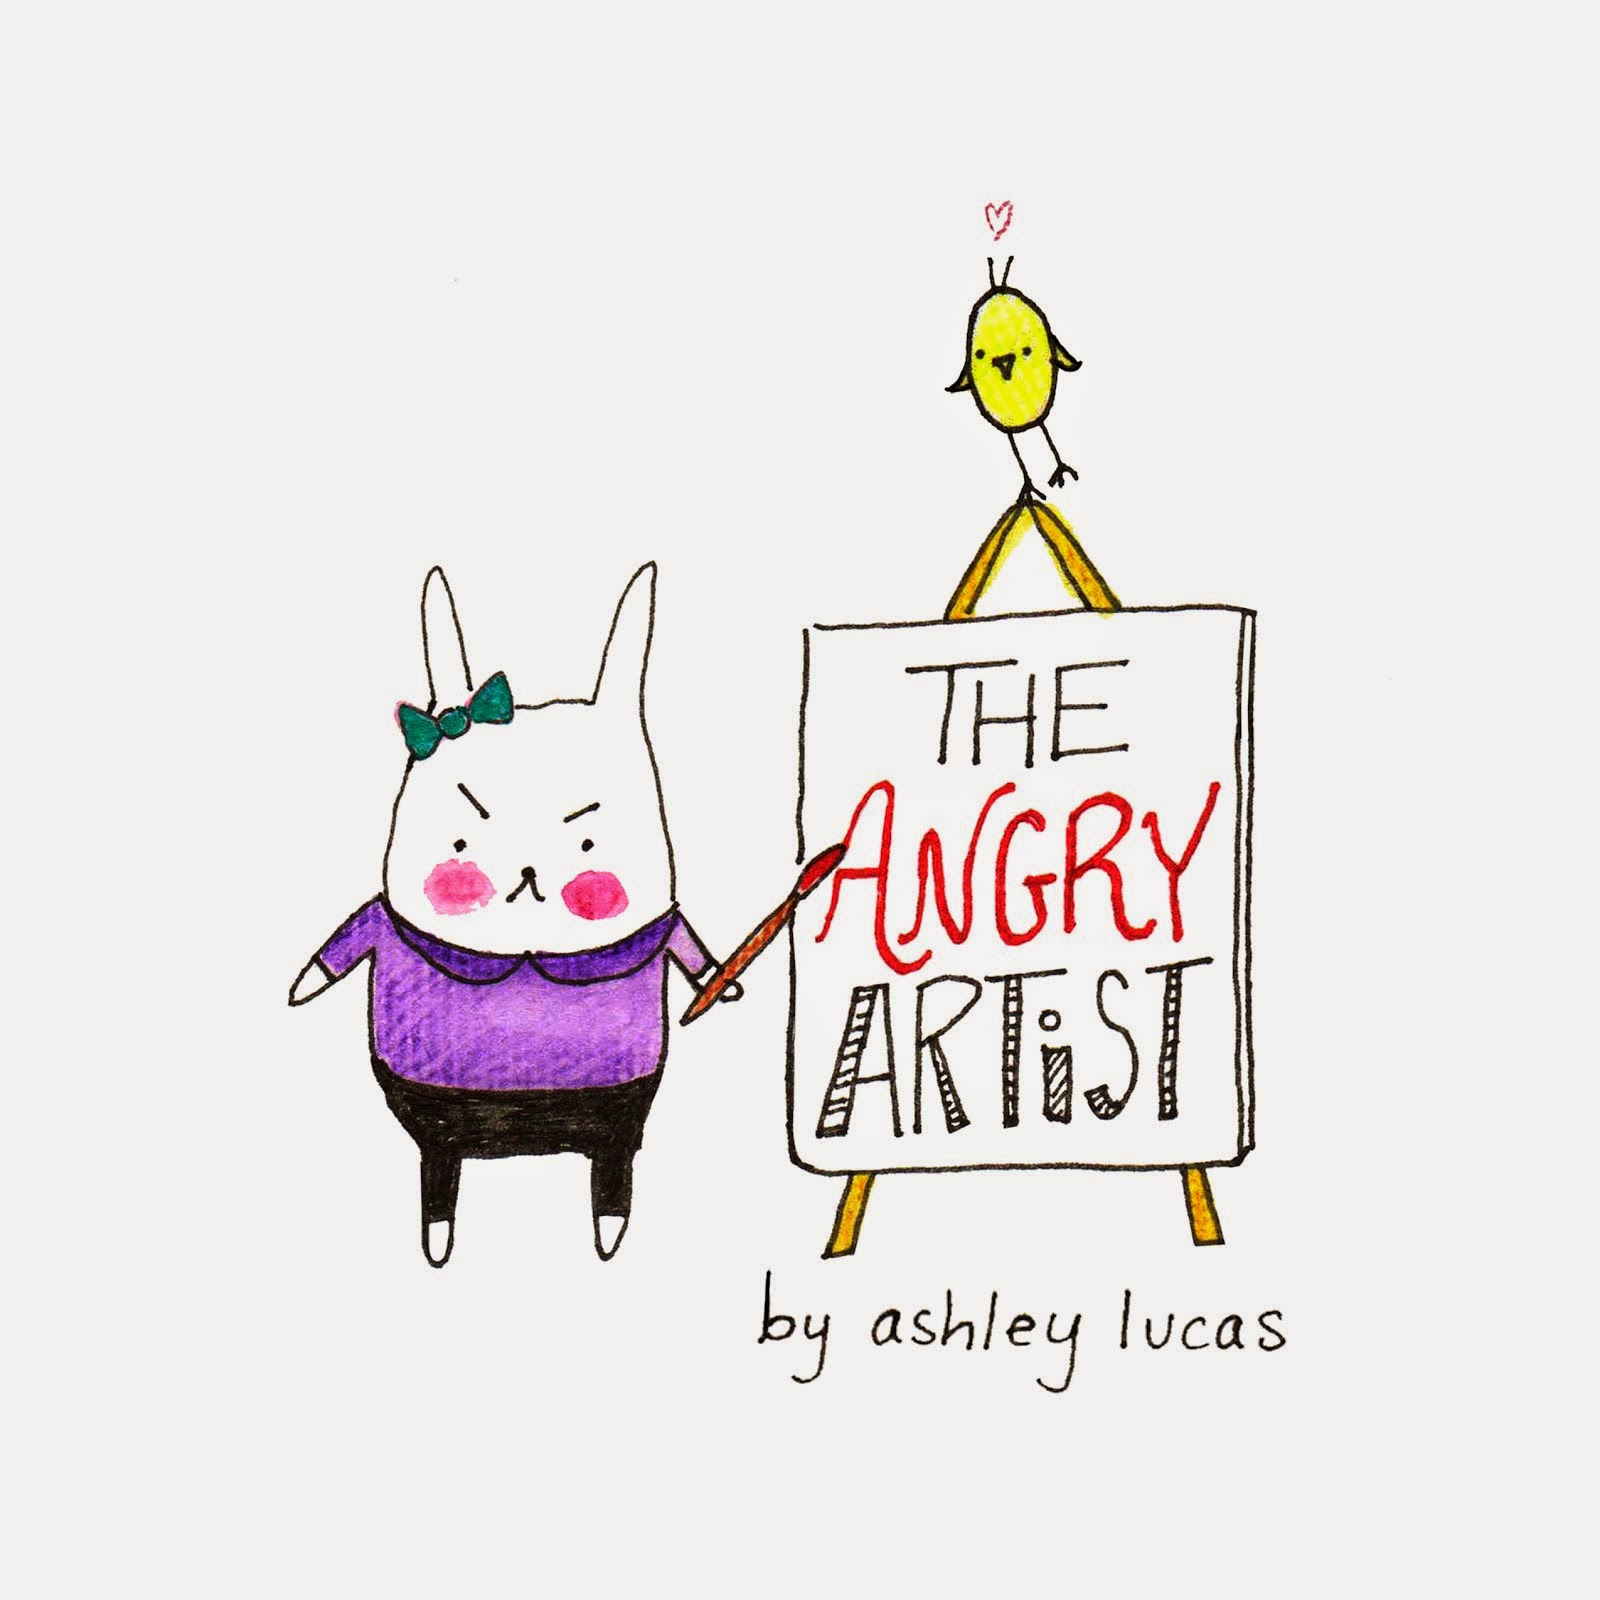 The Angry Artist